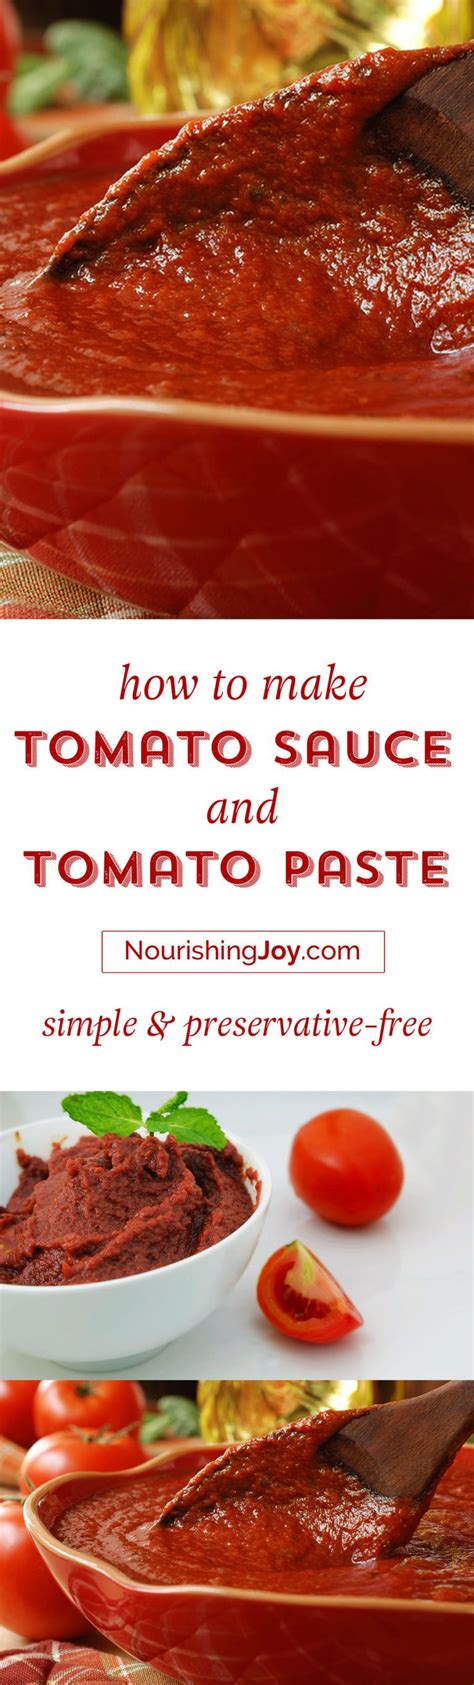 How do you make tomato sauce for pasta? How to Make Tomato Sauce (and Tomato Paste) | How to make tomato sauce